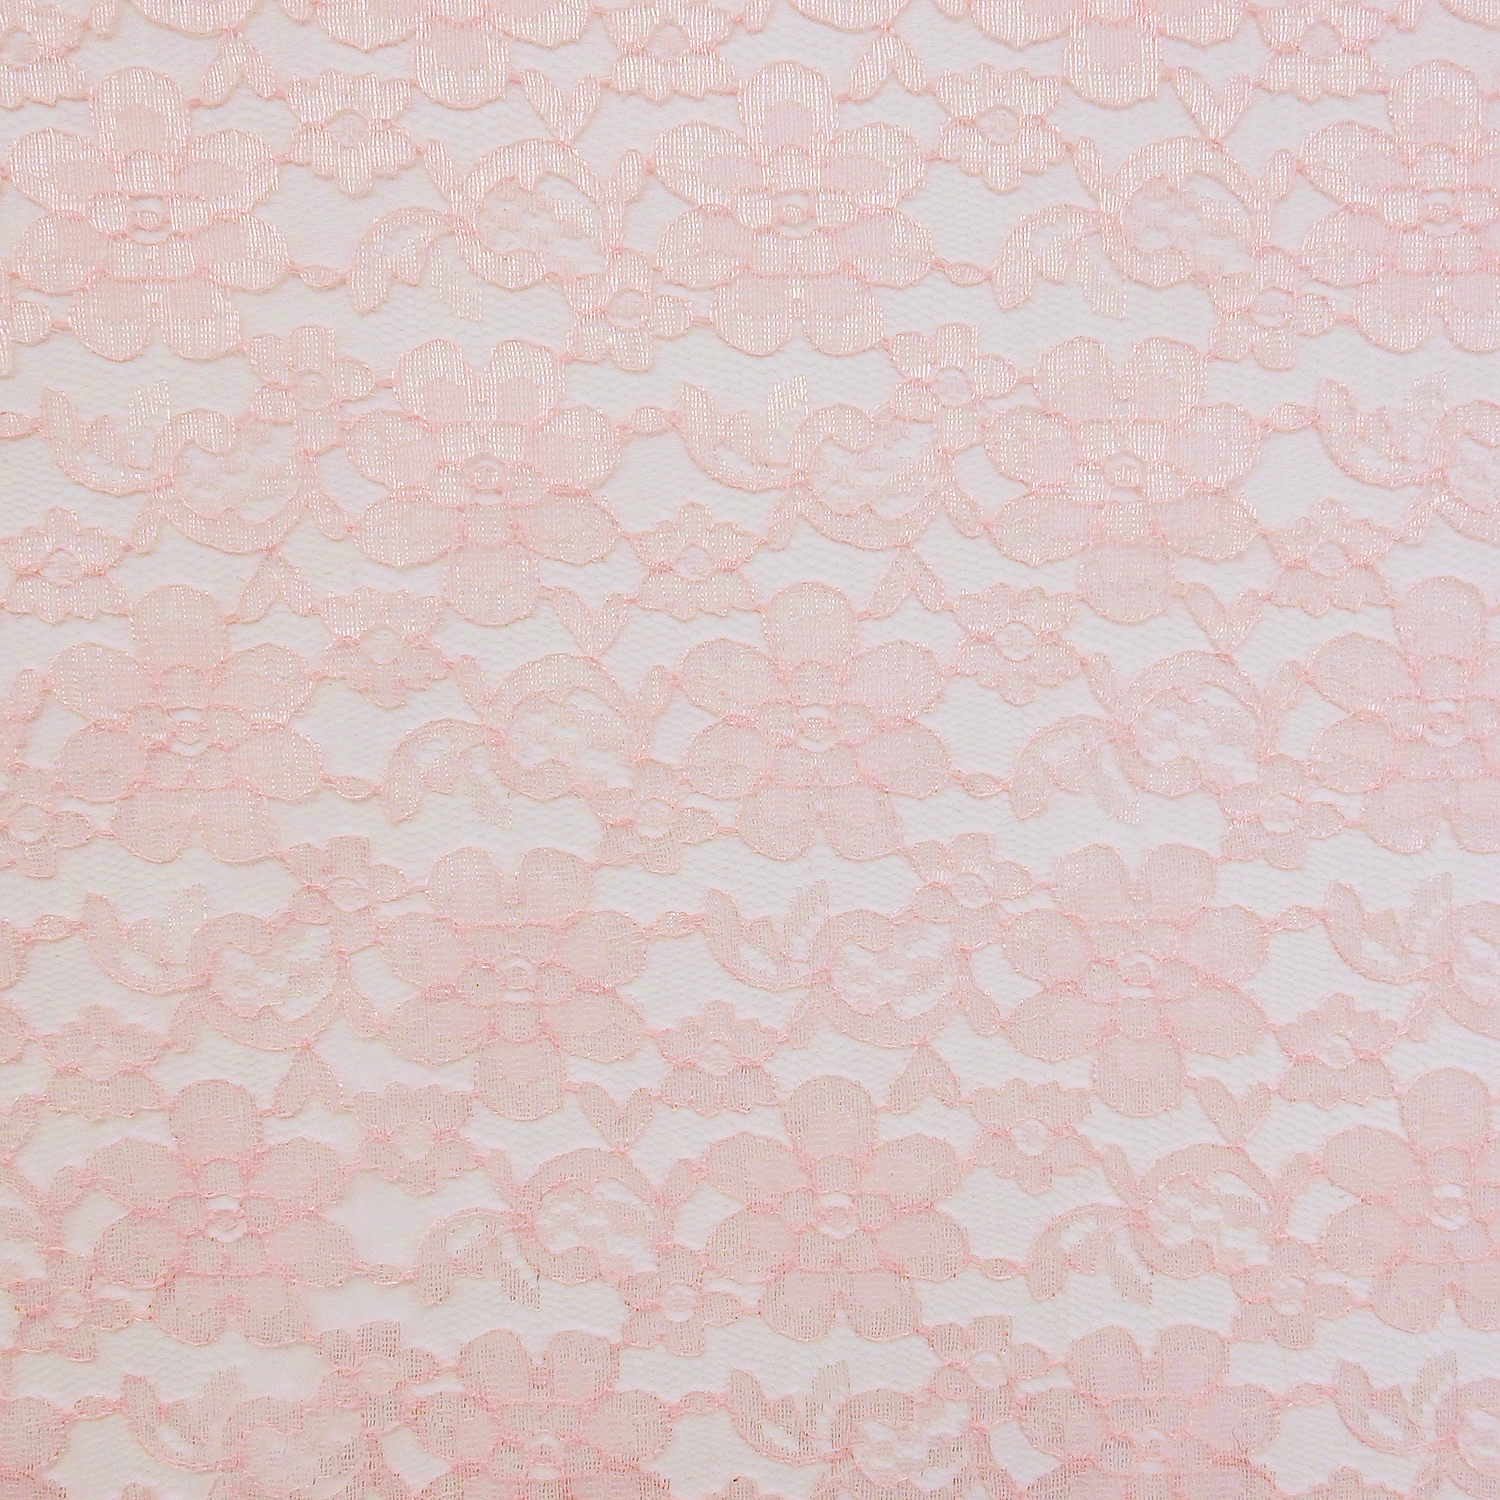 60 Floral Lace Fabric Pink, by the yard